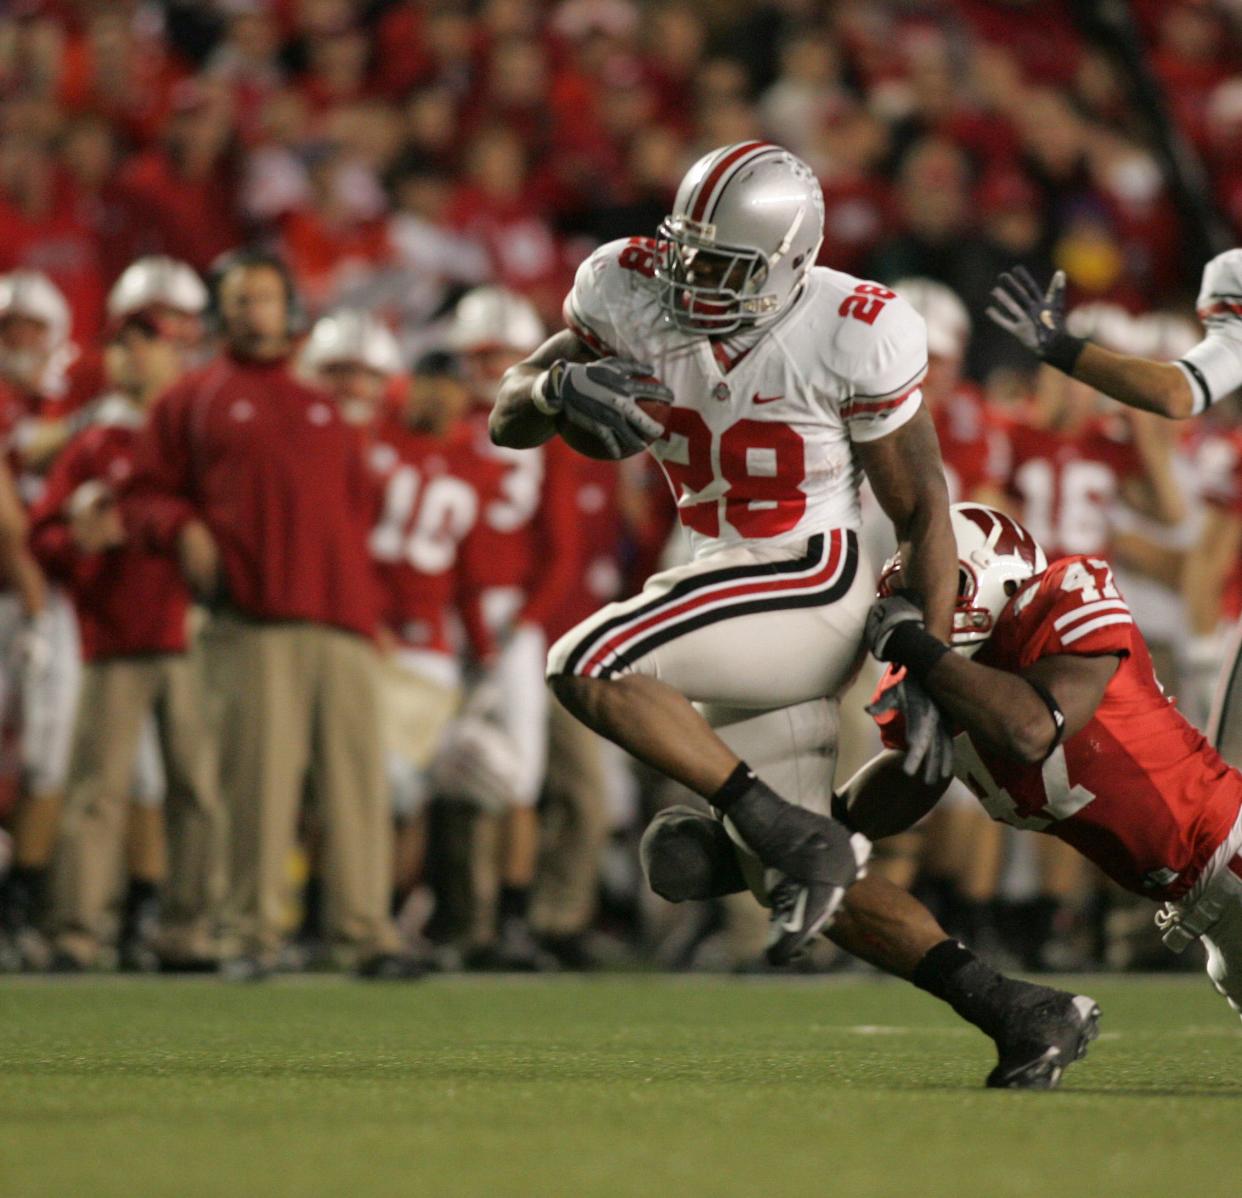 Ohio State's Chris Beanie Wells tries to elude Jaevery McFadden of Wisconsin during the third quarter, October 4, 2008, in Madison, Wisc.